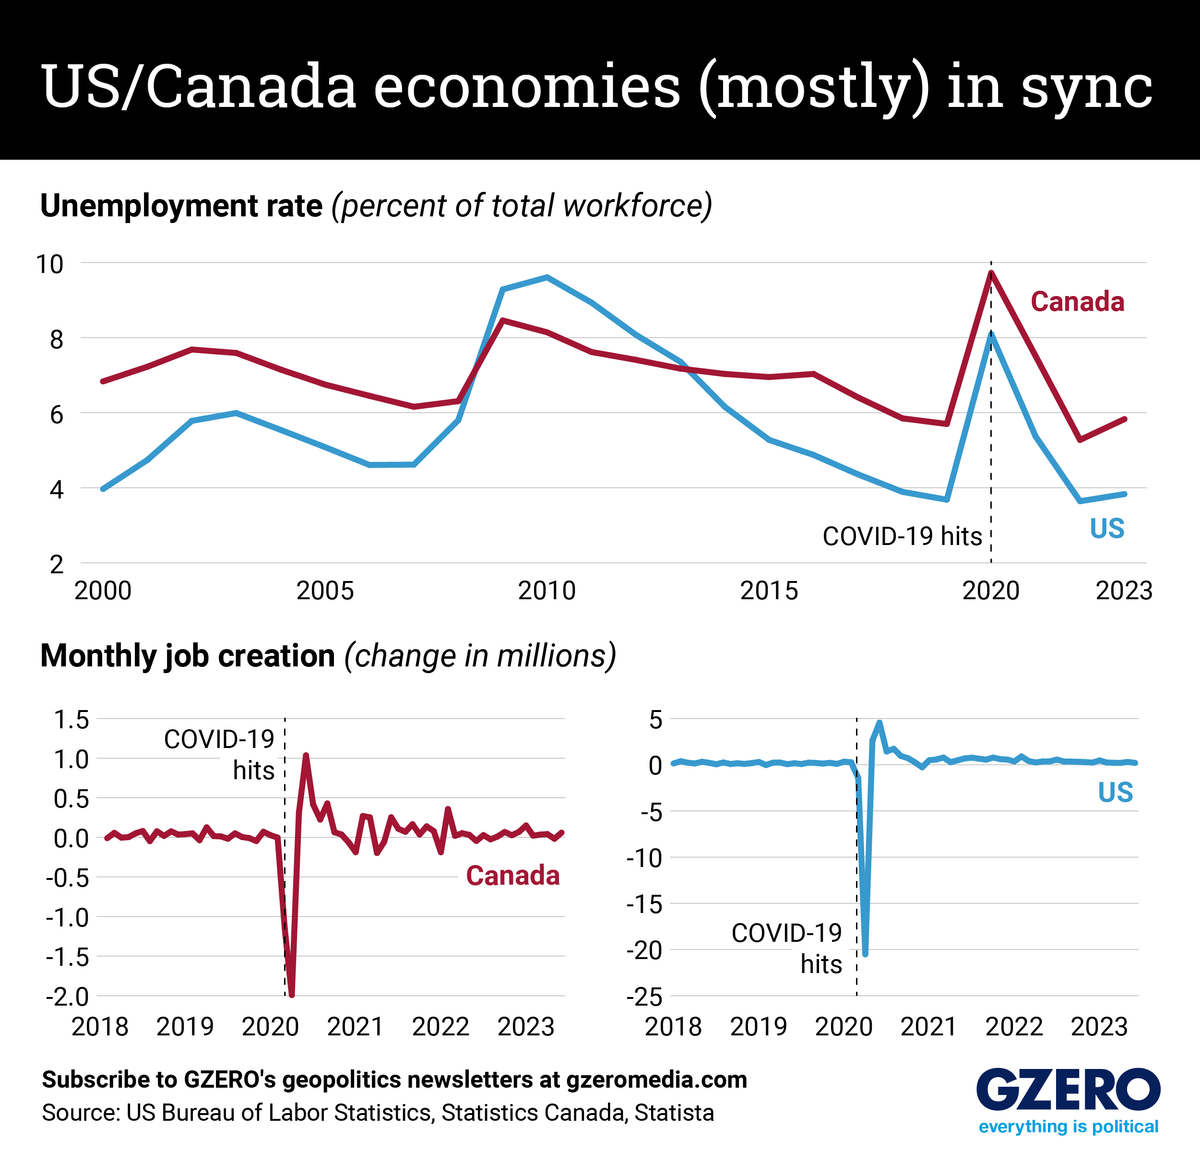 Set of line charts comparing US to Canada unemployment rates and monthly job creation